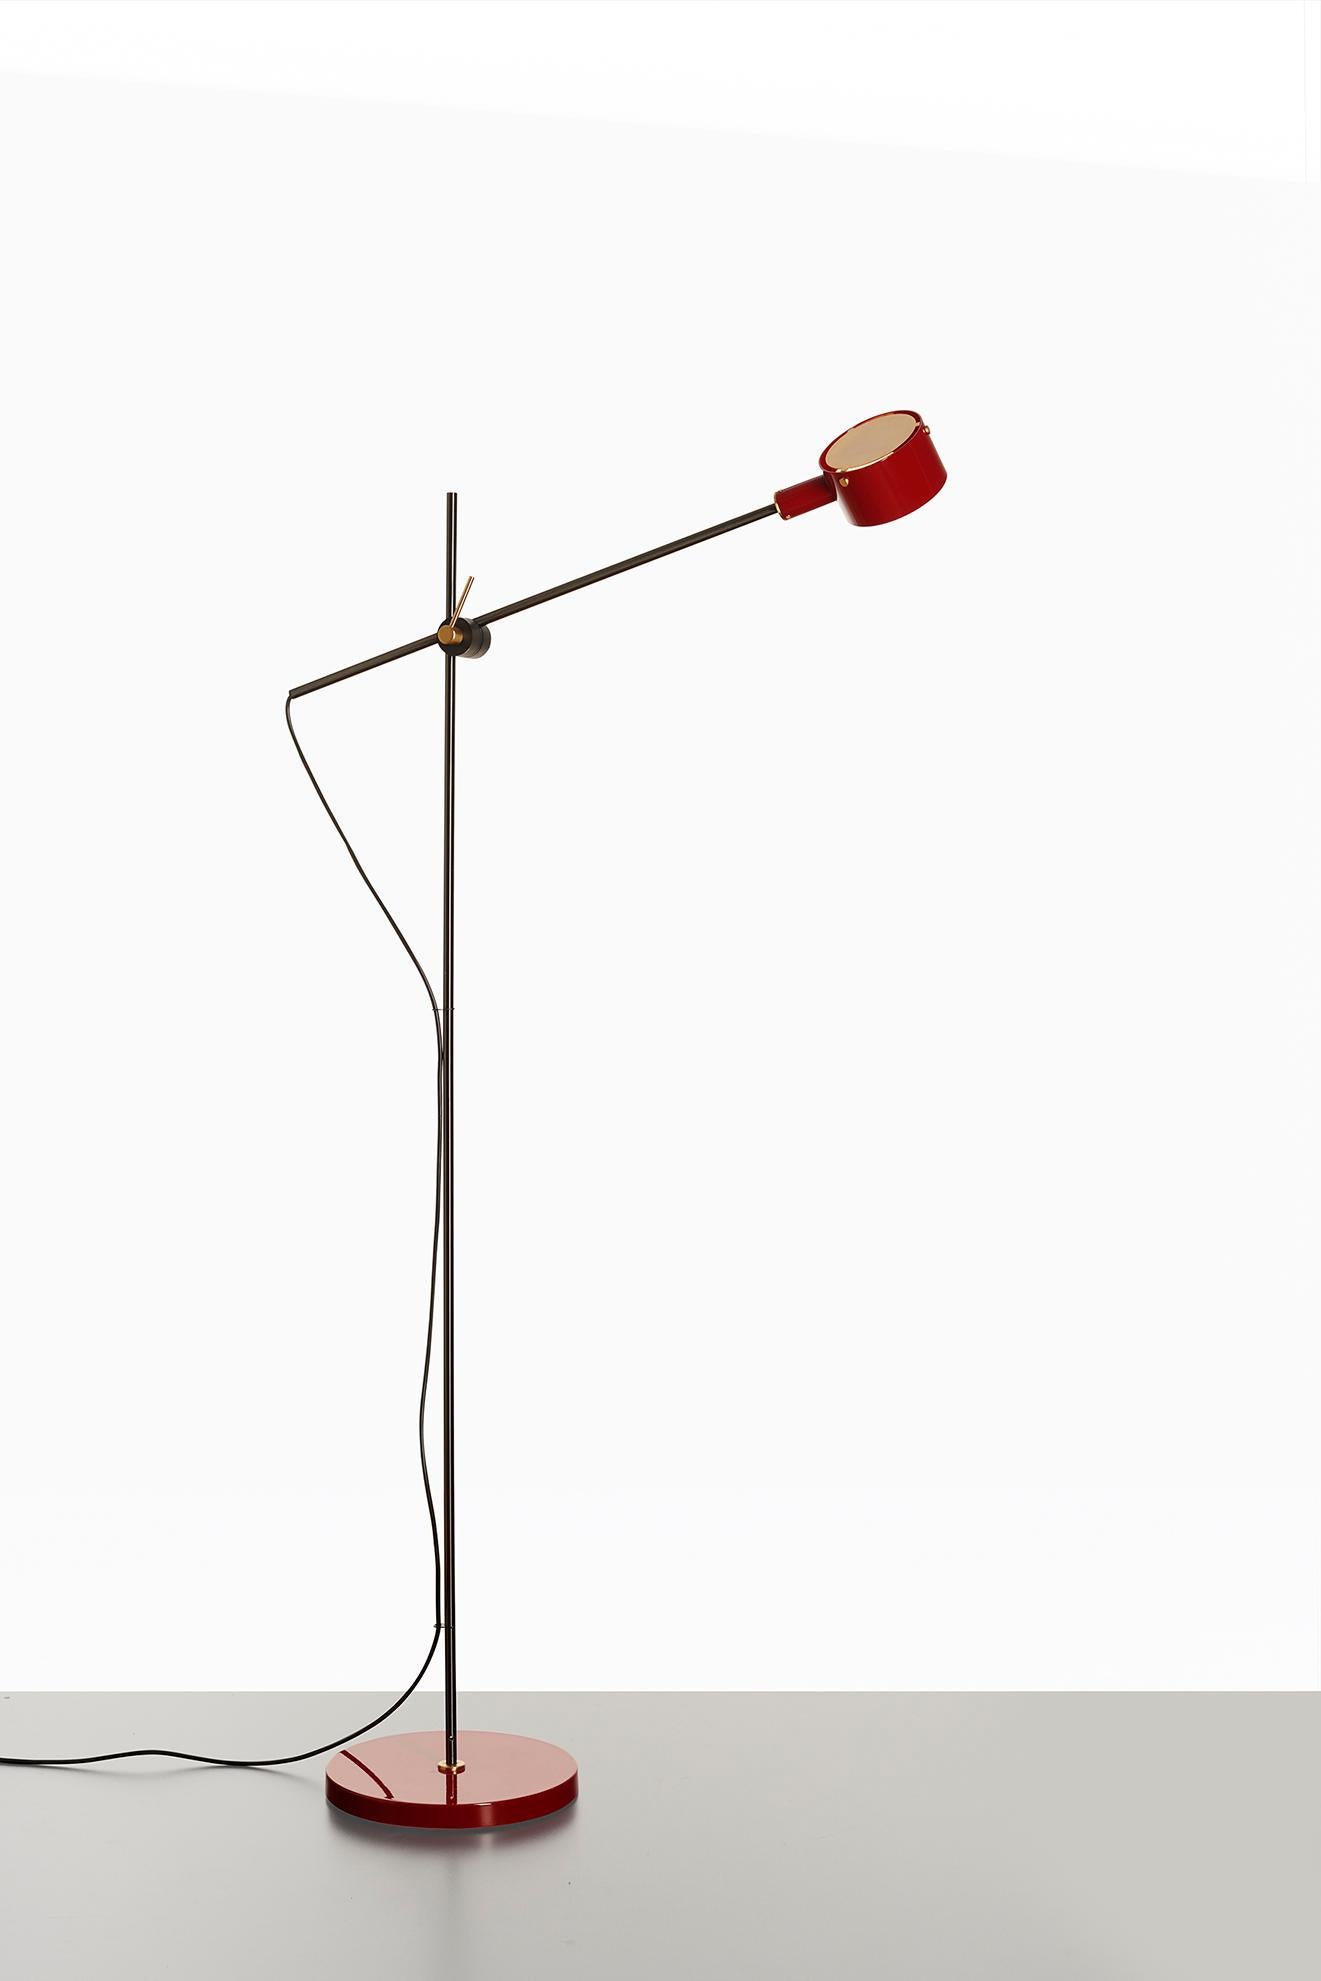 The G.O. lamp is the revival edition of a model designed for Oluce by Giuseppe Ostuni in the 1960s.
A lamp that, in the essence of its design, is extremely current, characterised by a vertical shaft from which a horizontal arm branches off and on